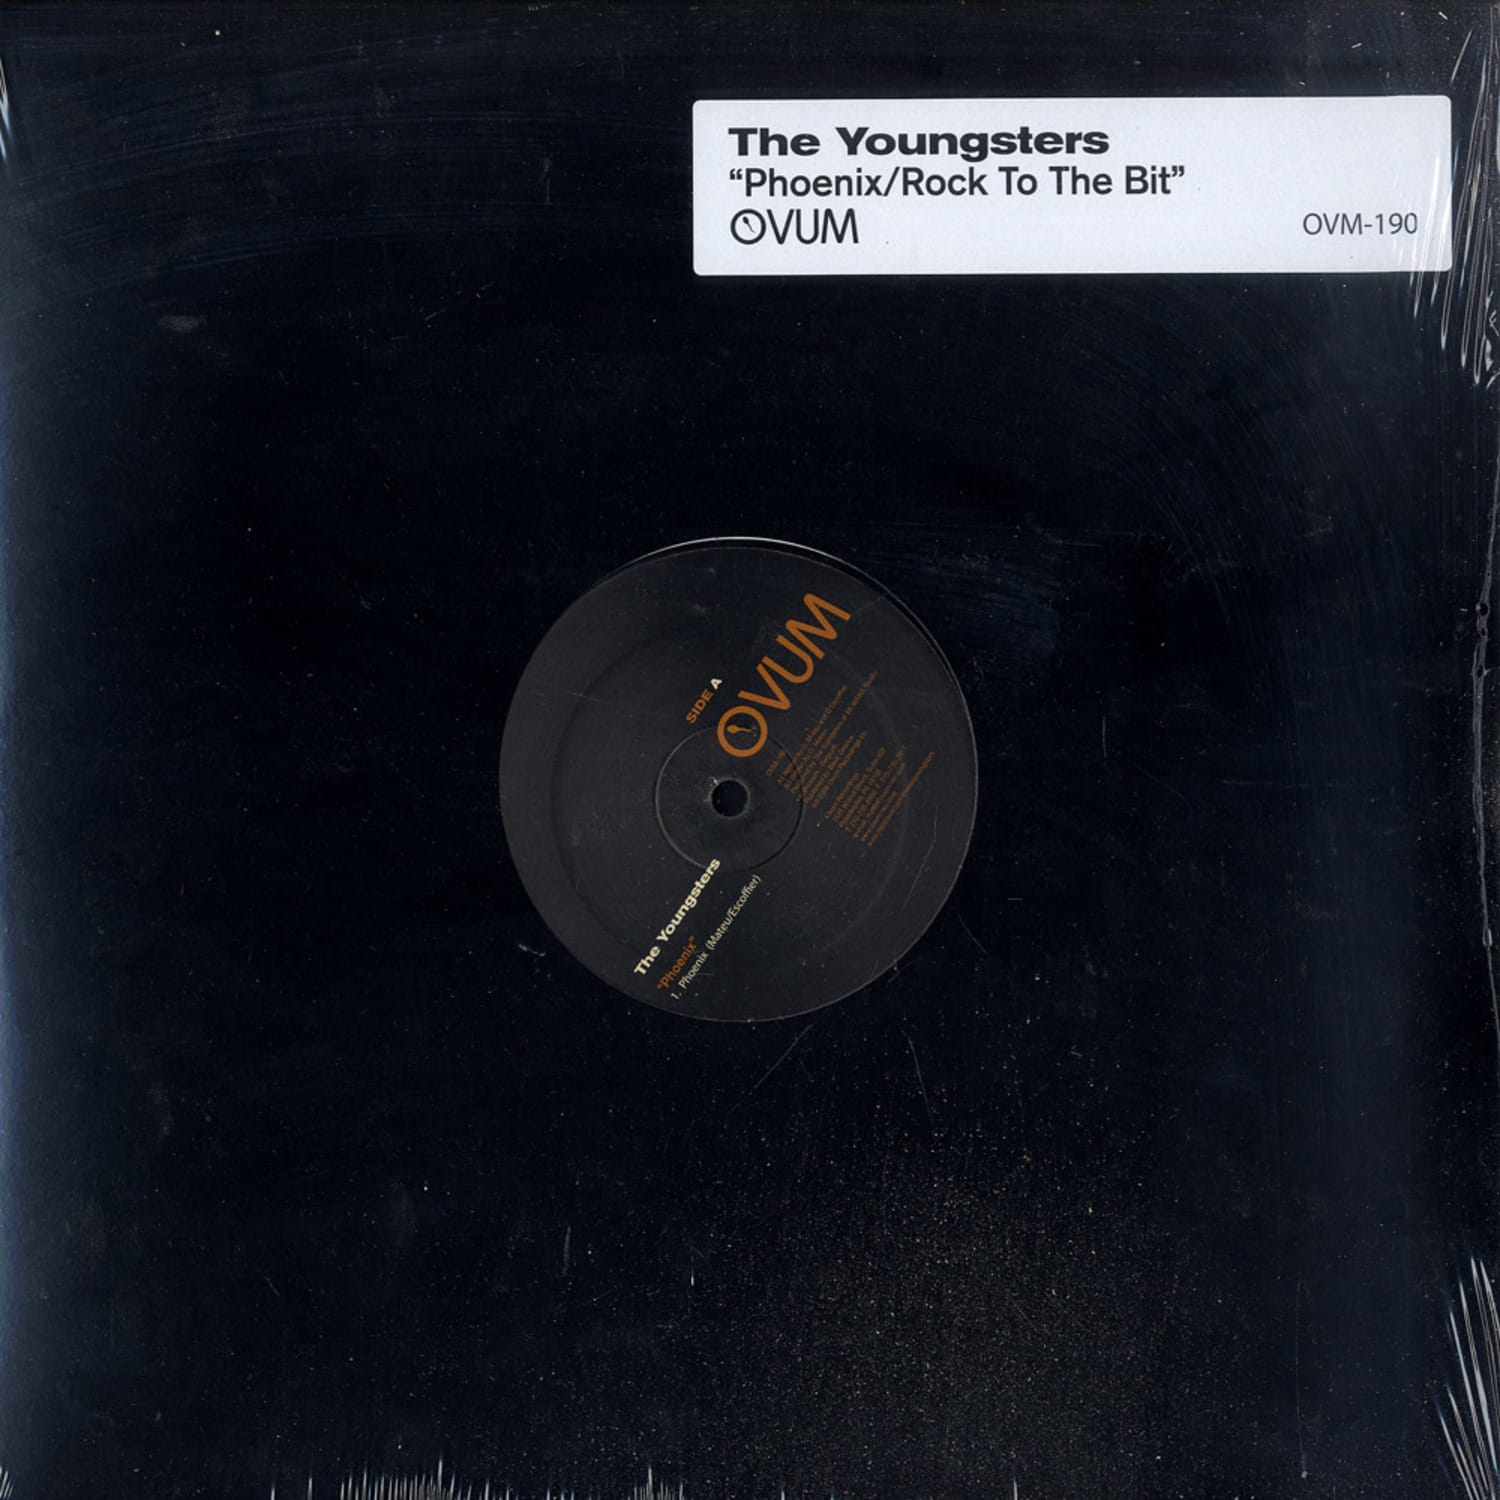 The Youngsters - THE PHOENIX